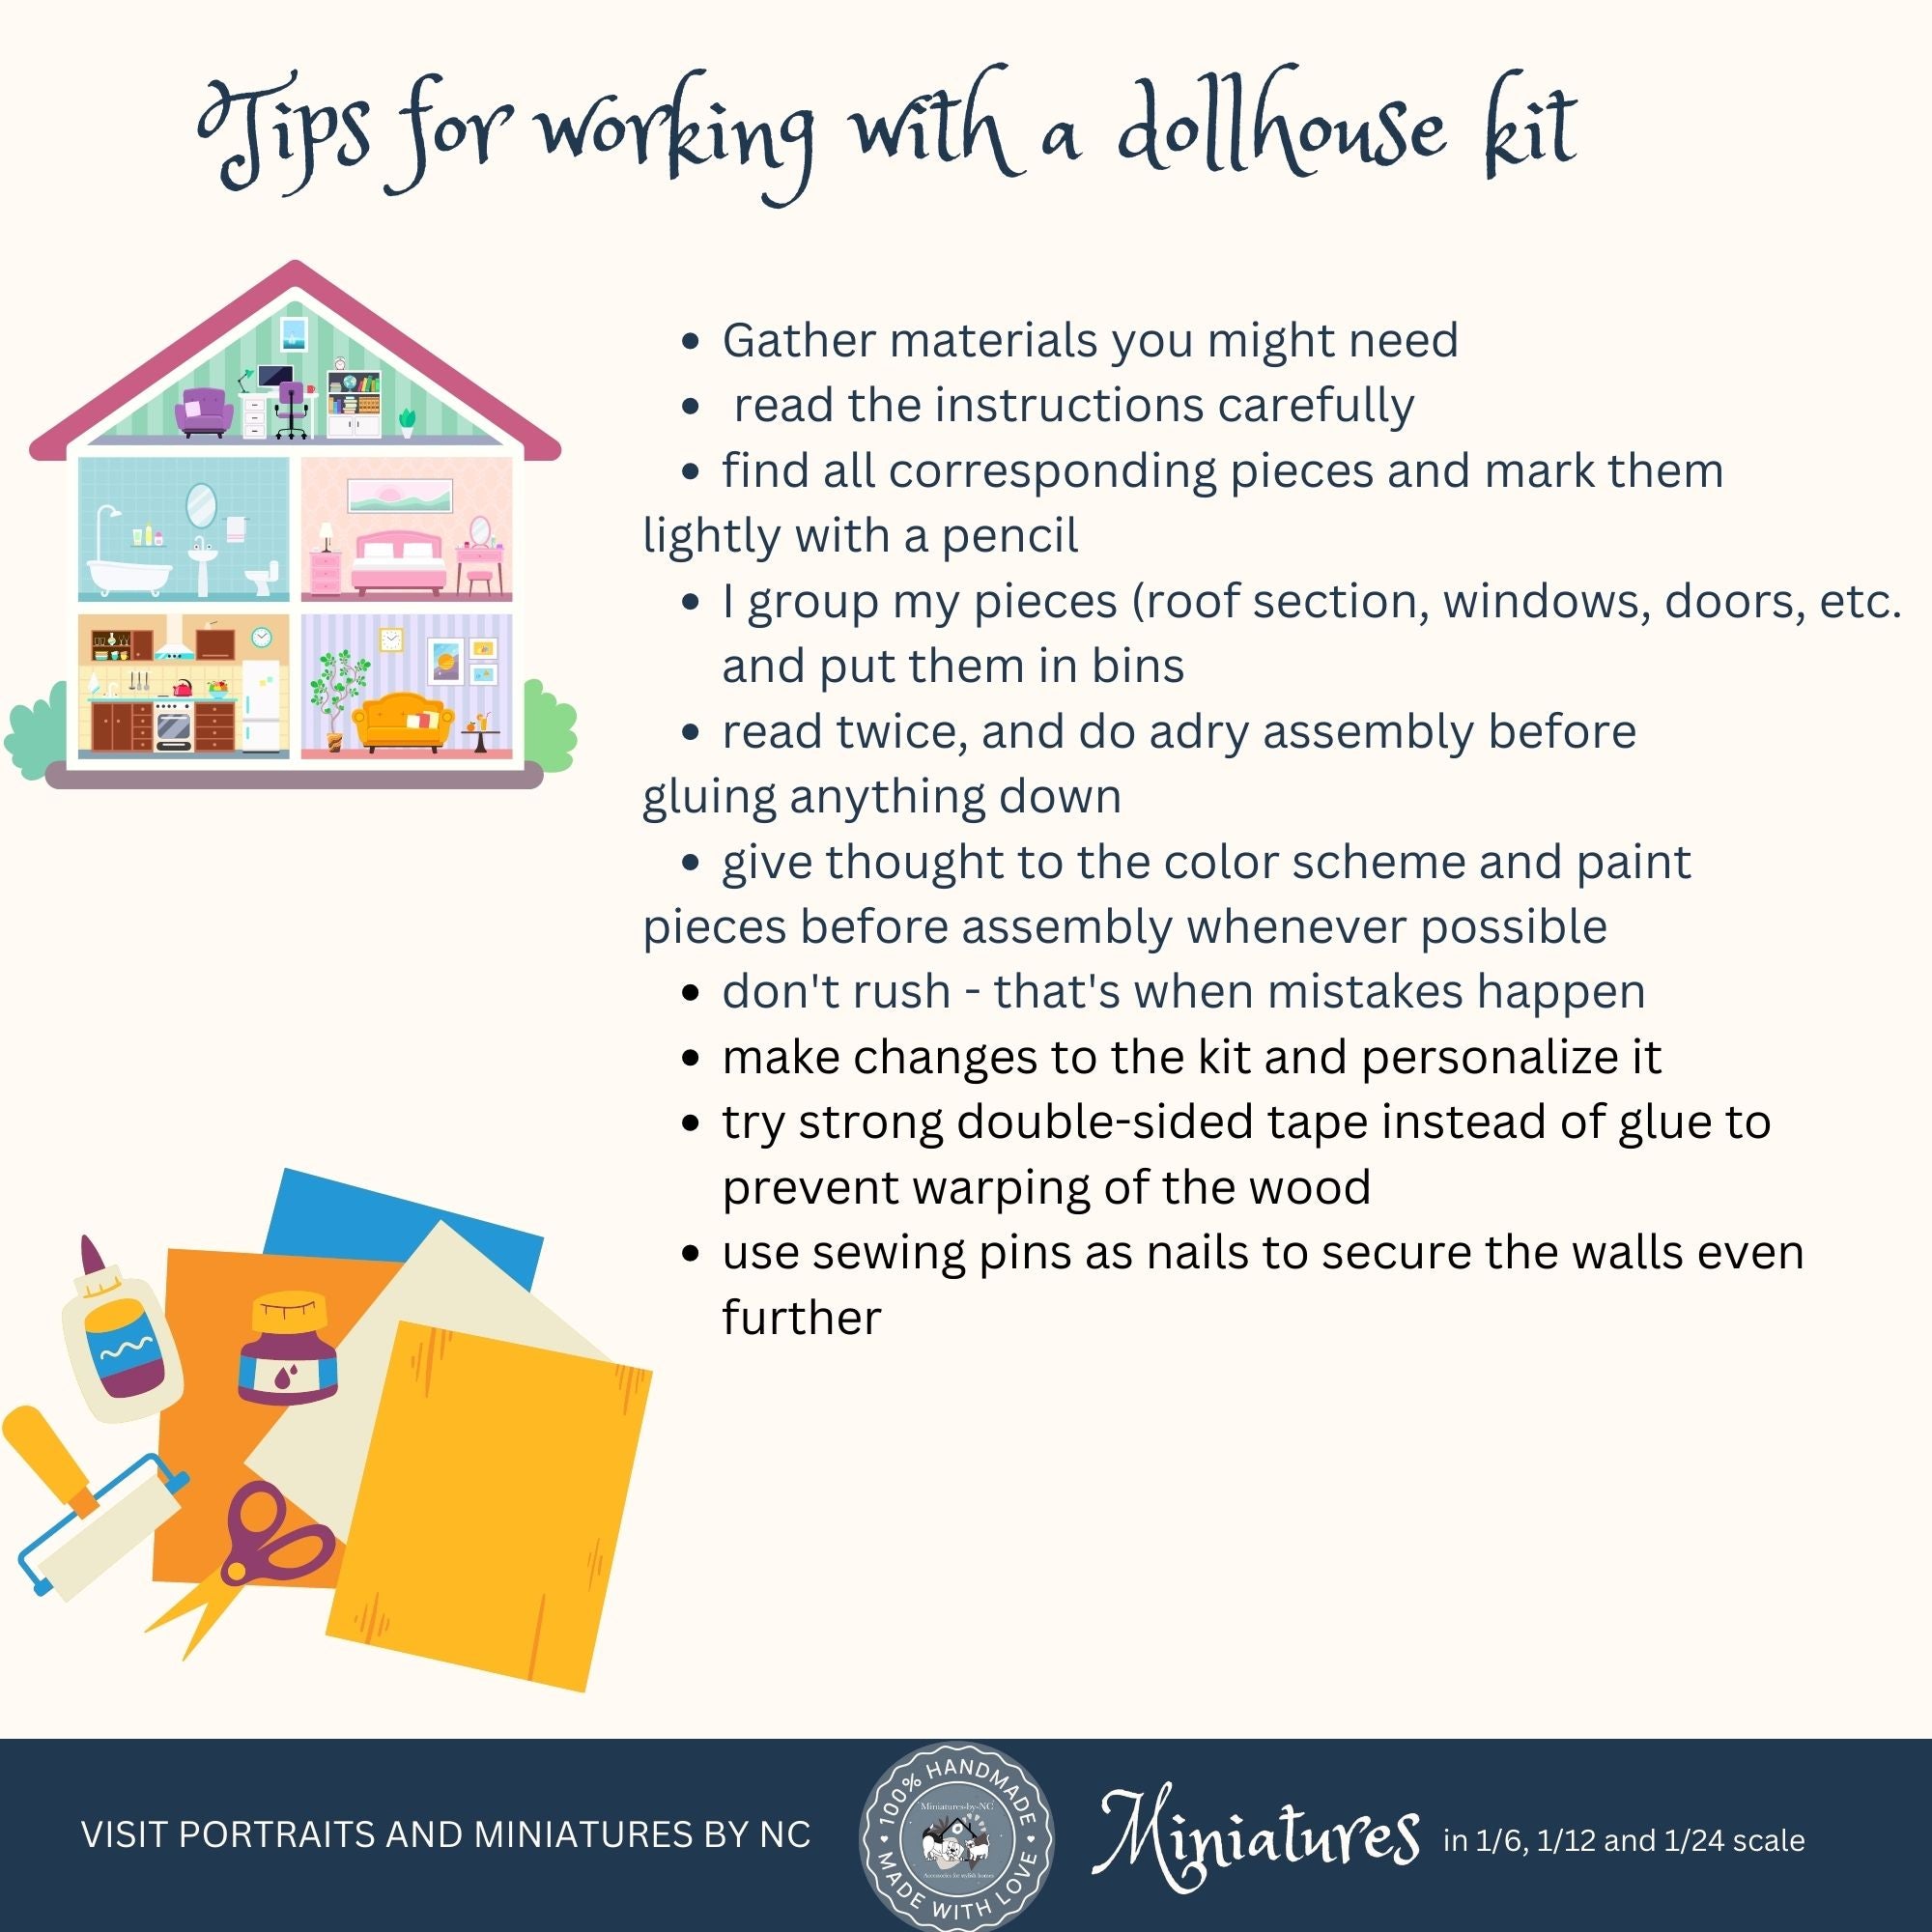 tips for working with dollhouse kit